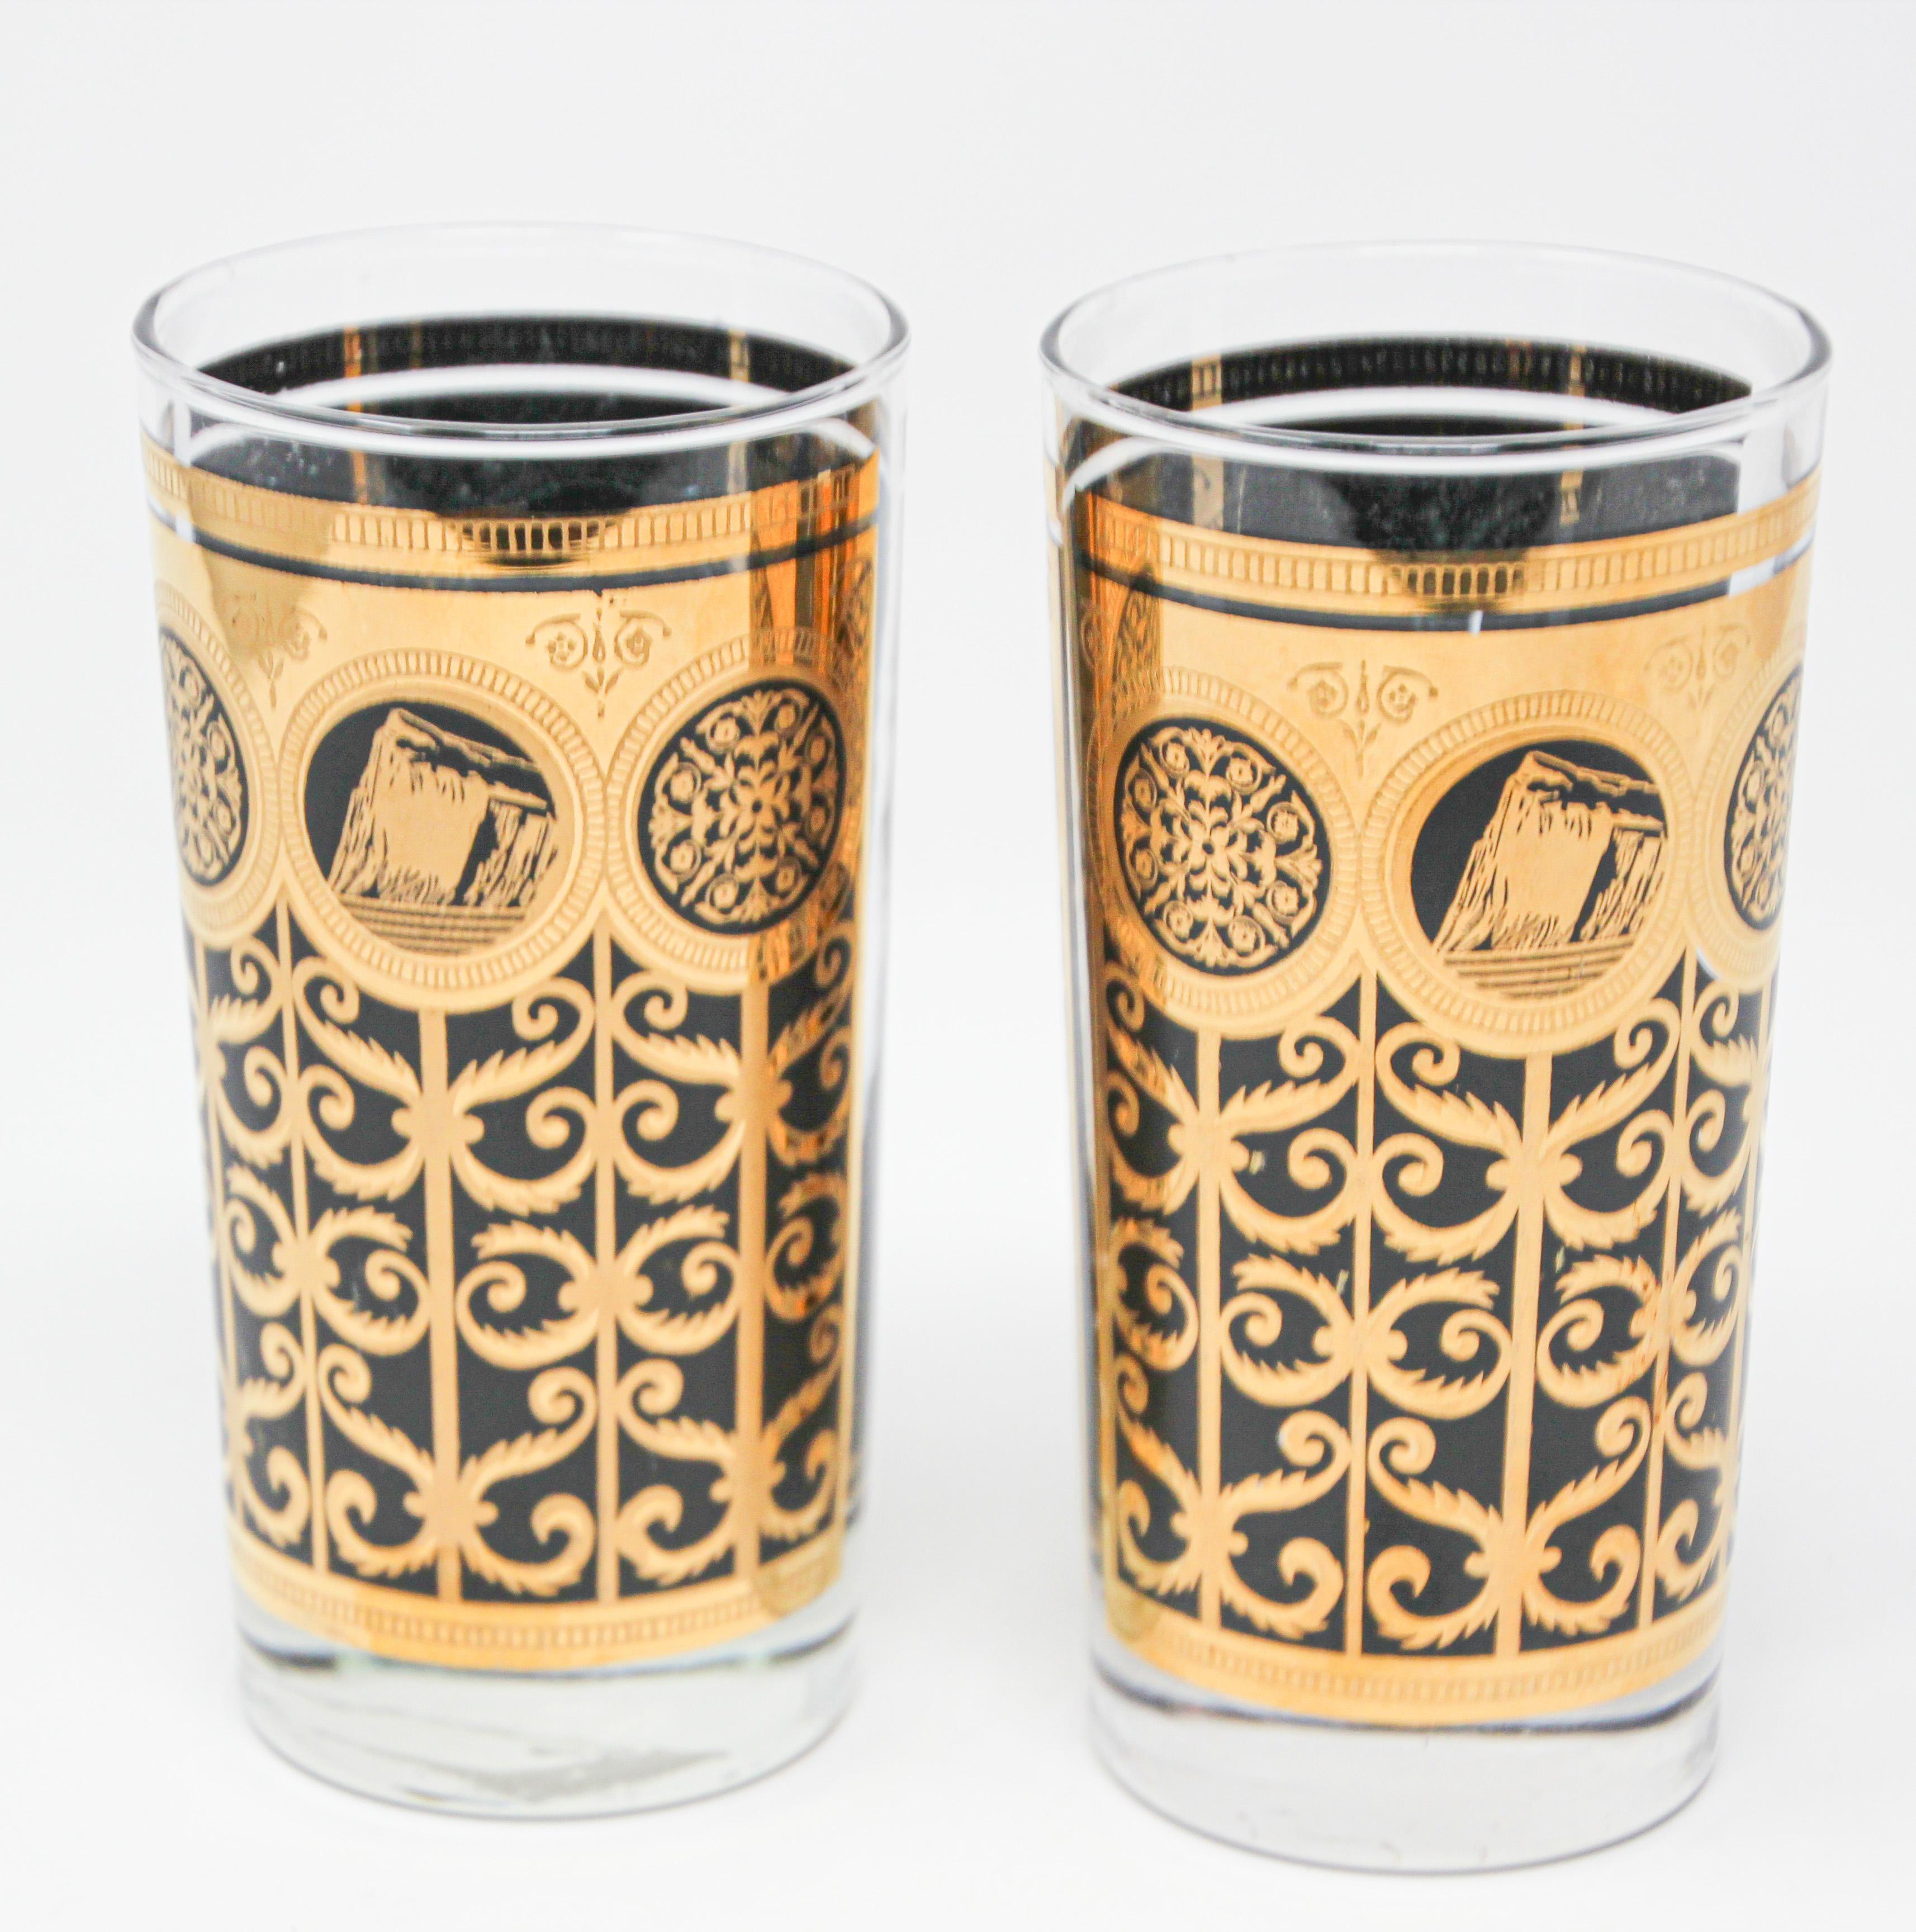 1960s Collectible Highball Black and Gold Barware Drinking Glasses by Fred Press.
Elegant exquisite vintage set of two Collins cocktail glasses designed by Fred Press.
Hollywood regency collectible barware.
Set includes two highball tumbler glasses